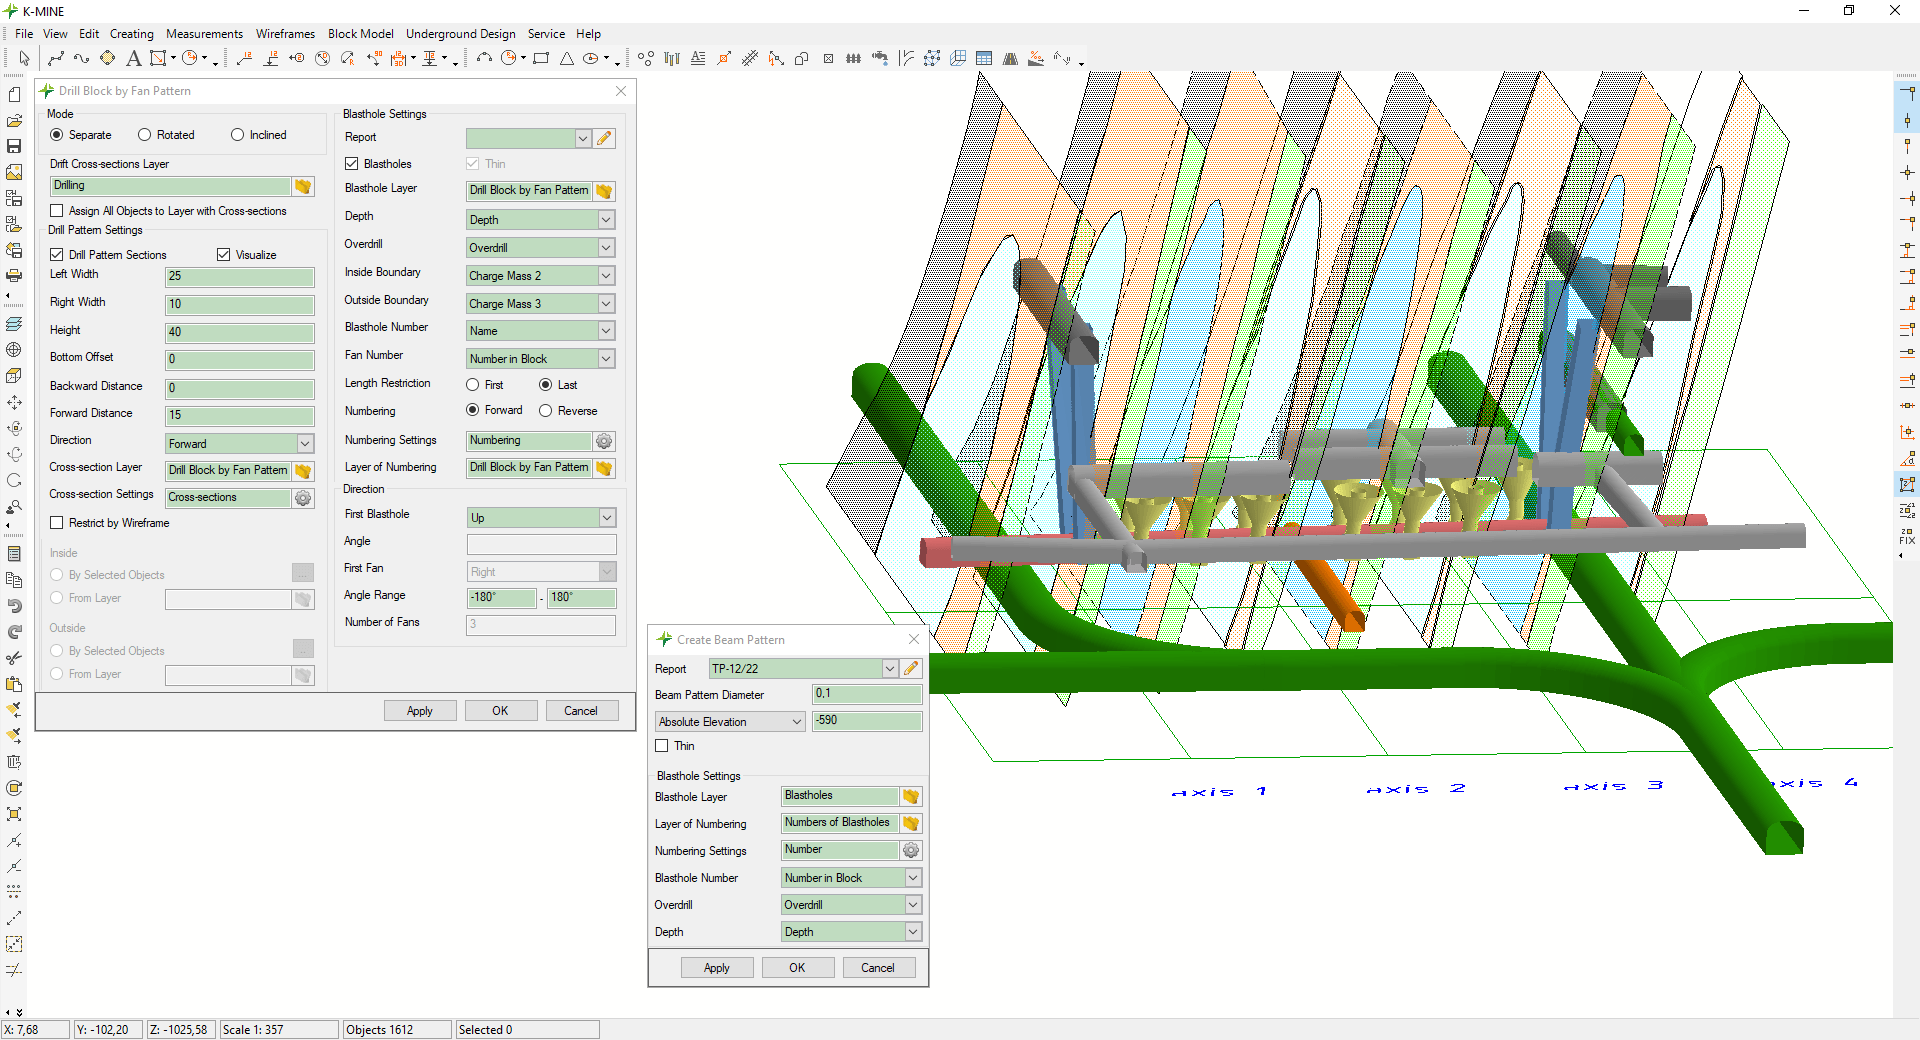 Creating geological and surveying sections according to existing models